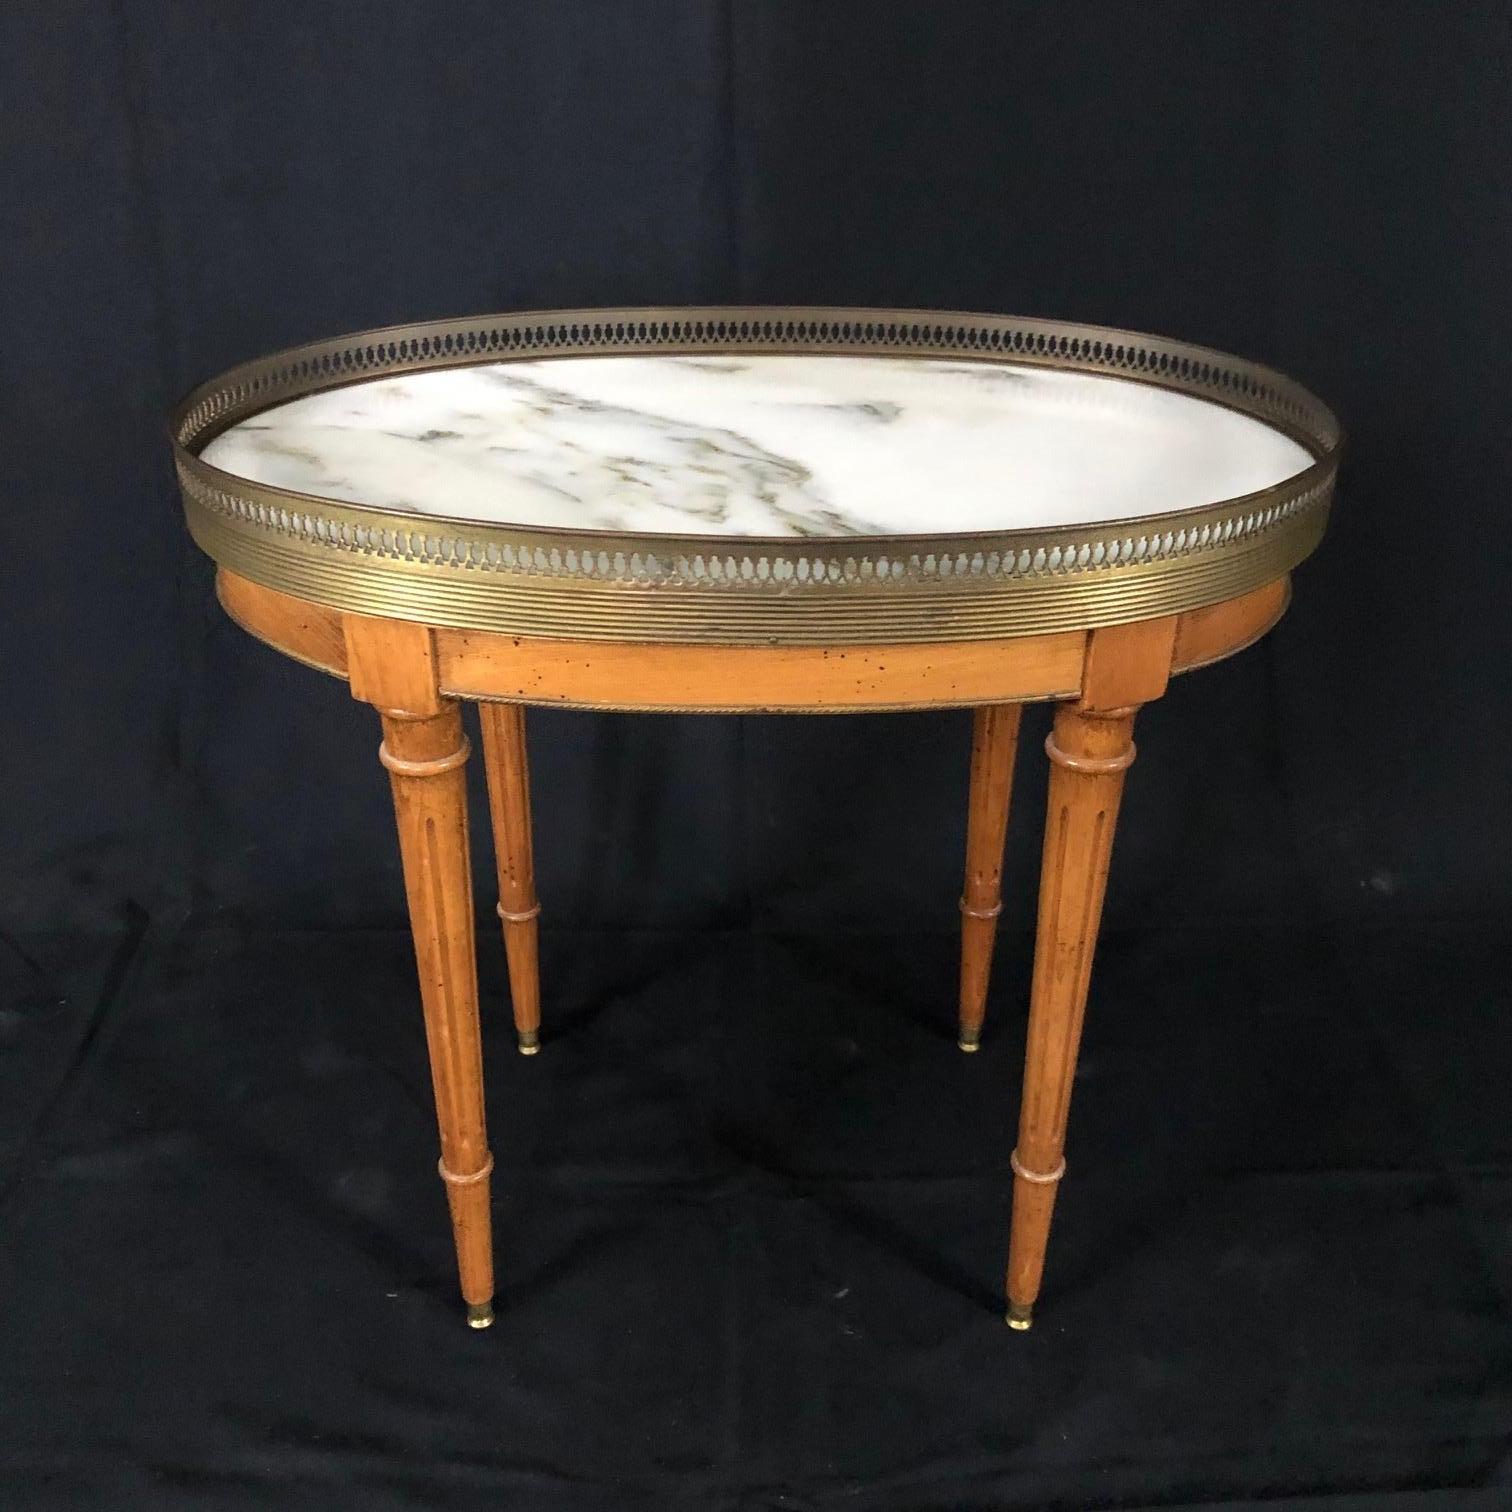 French Louis XVI style light oak side table having beautiful Carrara marble top and brass gallery over reeded tapered legs terminating in brass capped feet.
#5154.